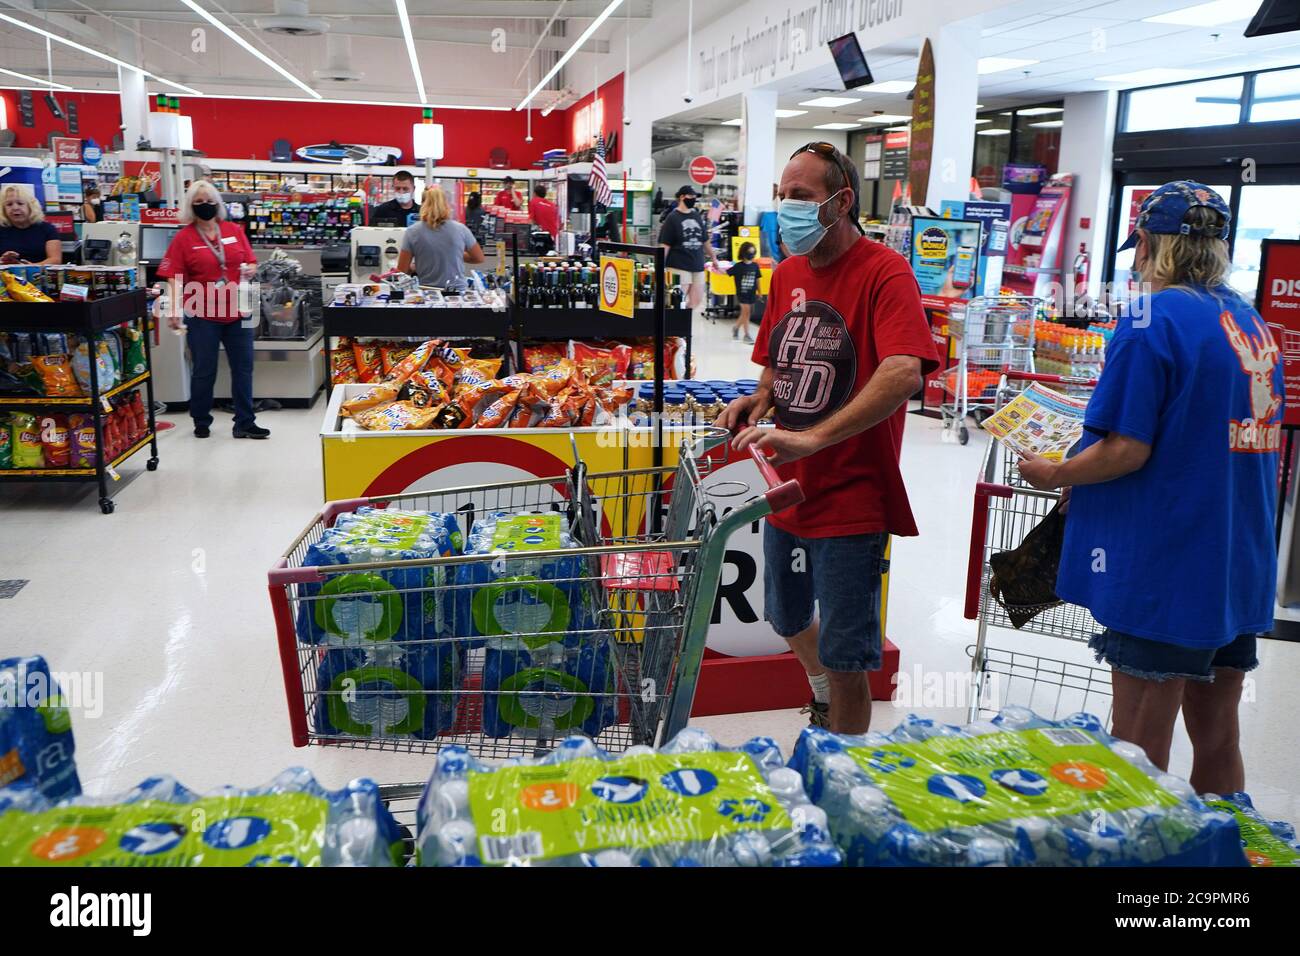 Florida, United States. 01st Aug, 2020. A shopper wearing a protective face mask fills a grocery cart with bottled water at a Winn-Dixie supermarket in preparation for the arrival of Hurricane Isaias.The storm is forecast to approach the coast of Florida as a Category 1 storm and then parallel the Atlantic coast as it moves north. Credit: SOPA Images Limited/Alamy Live News Stock Photo